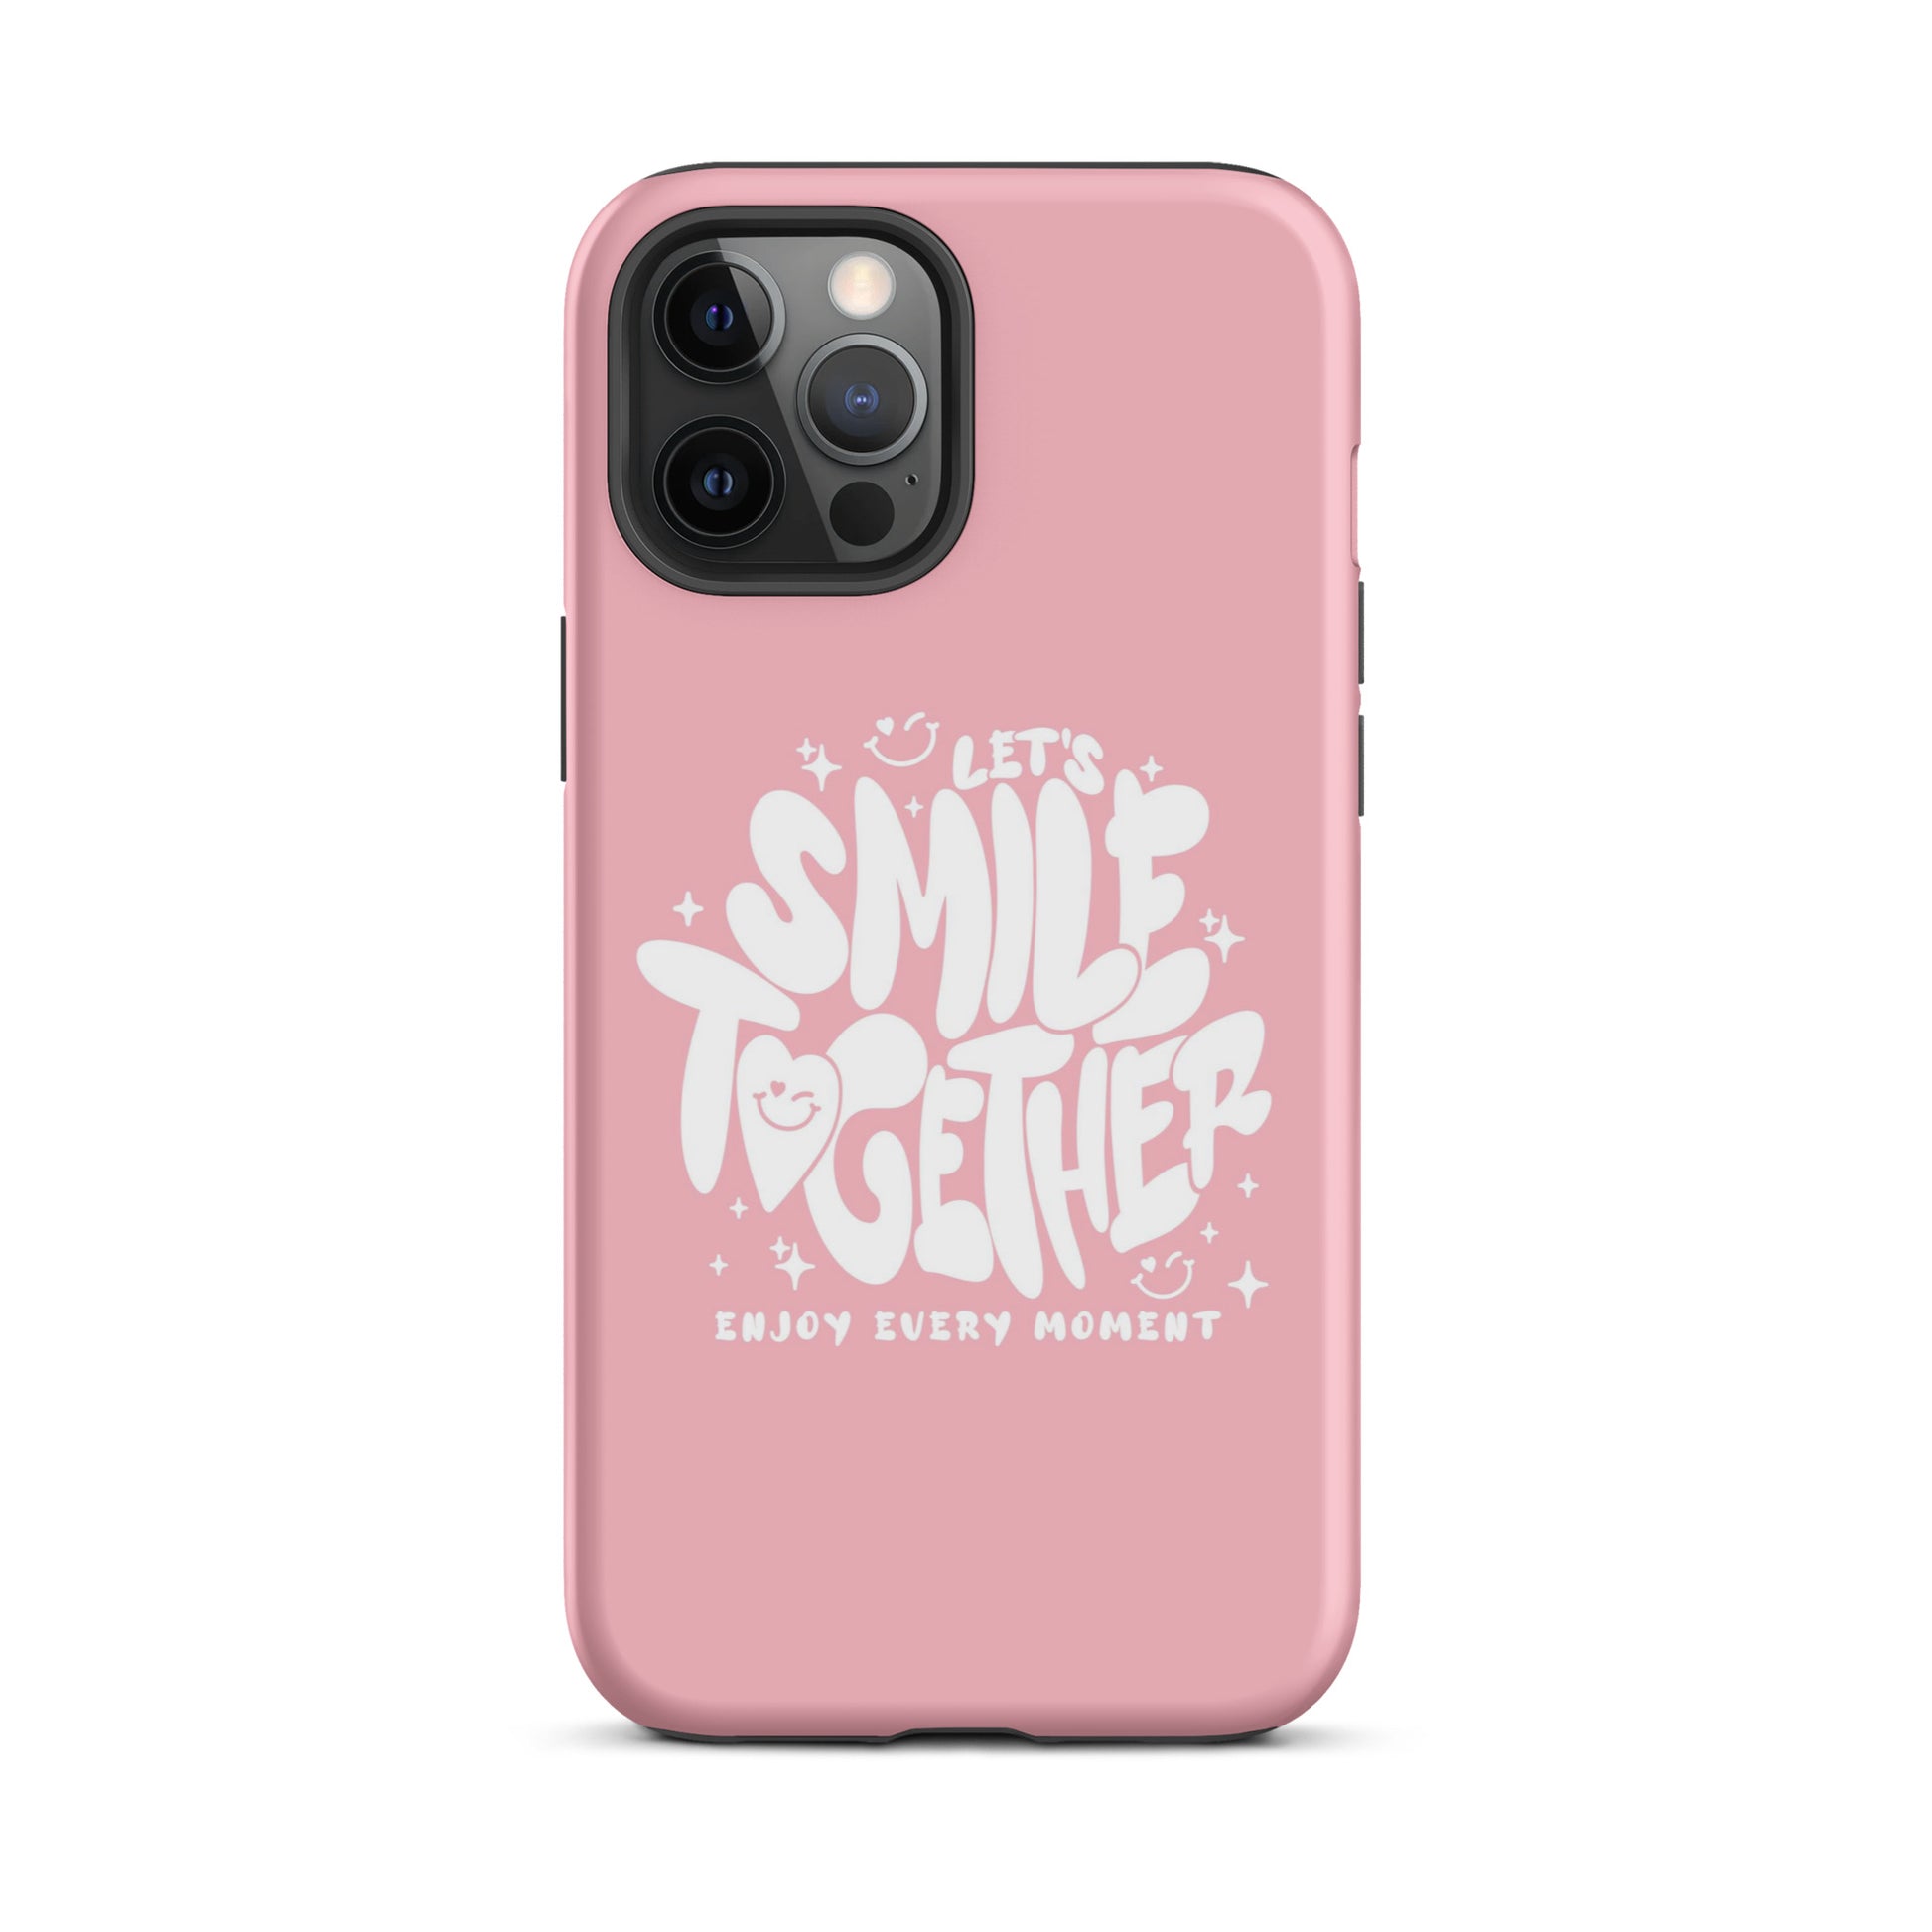 Smile Together iPhone Case iPhone 12 Pro Max Matte